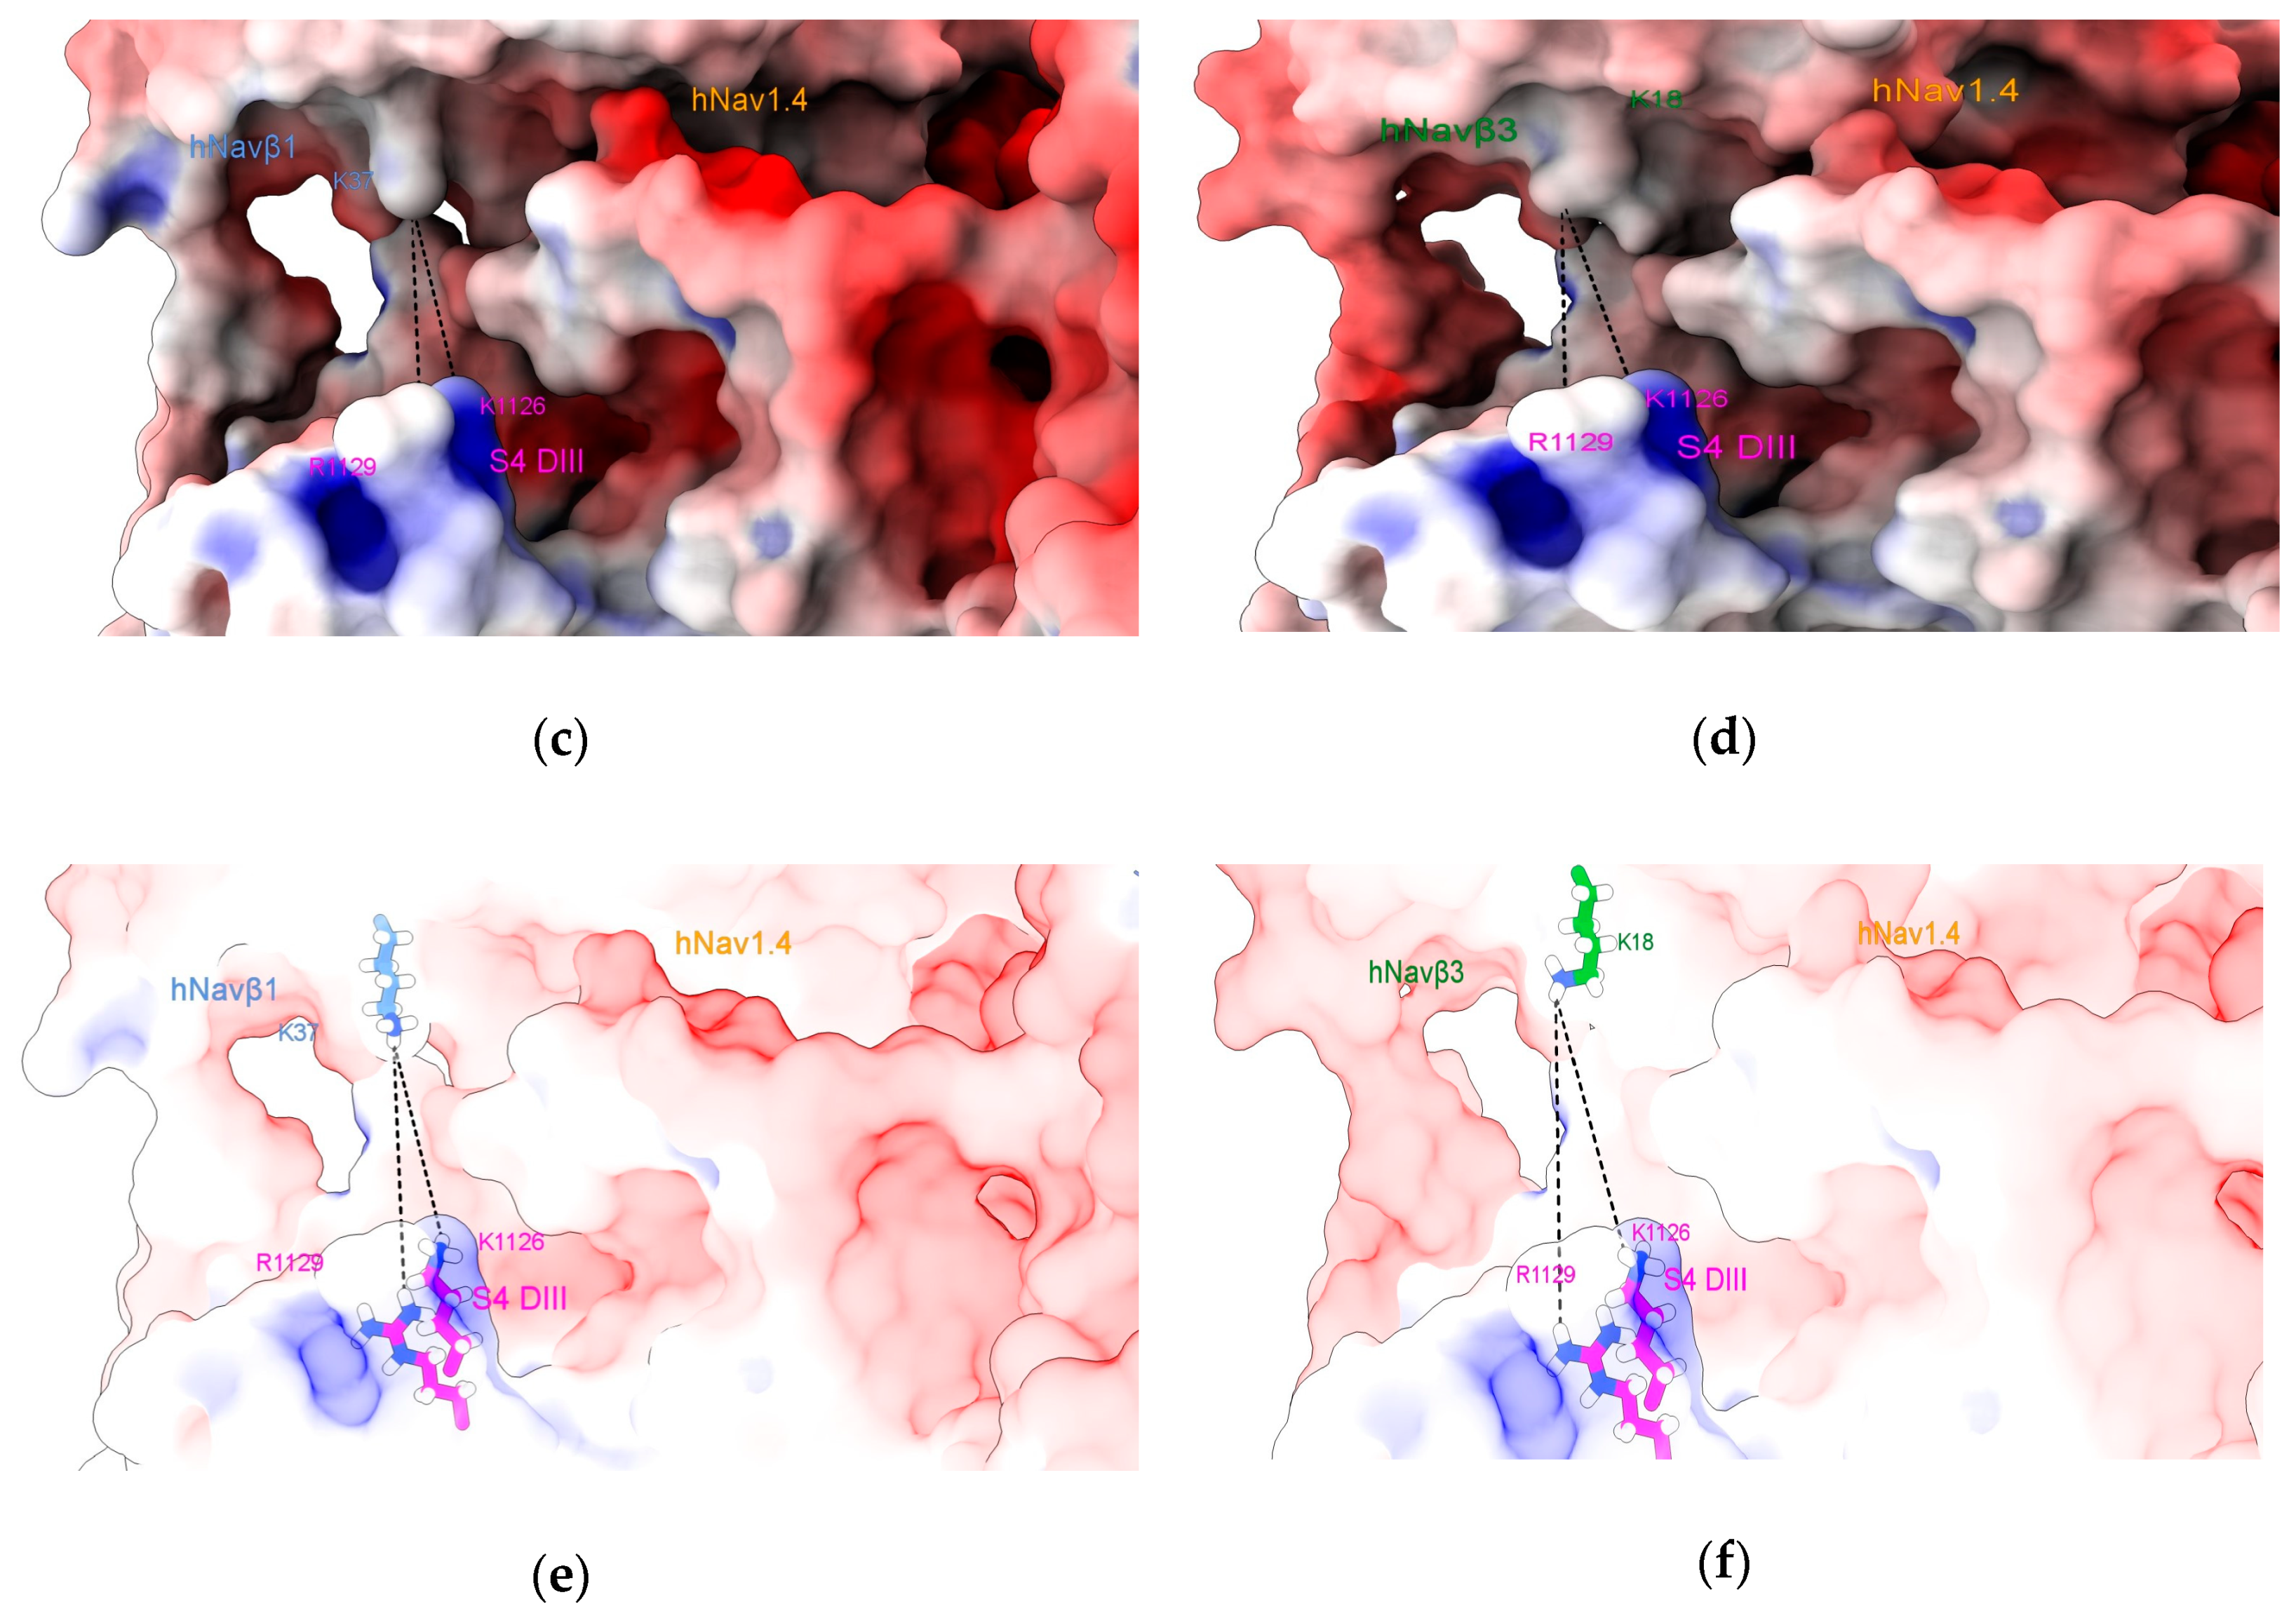 Molecules Free Full Text Chemometric Models Of Differential Amino Acids At The Nava And Navb Interface Of Mammalian Sodium Channel Isoforms Html